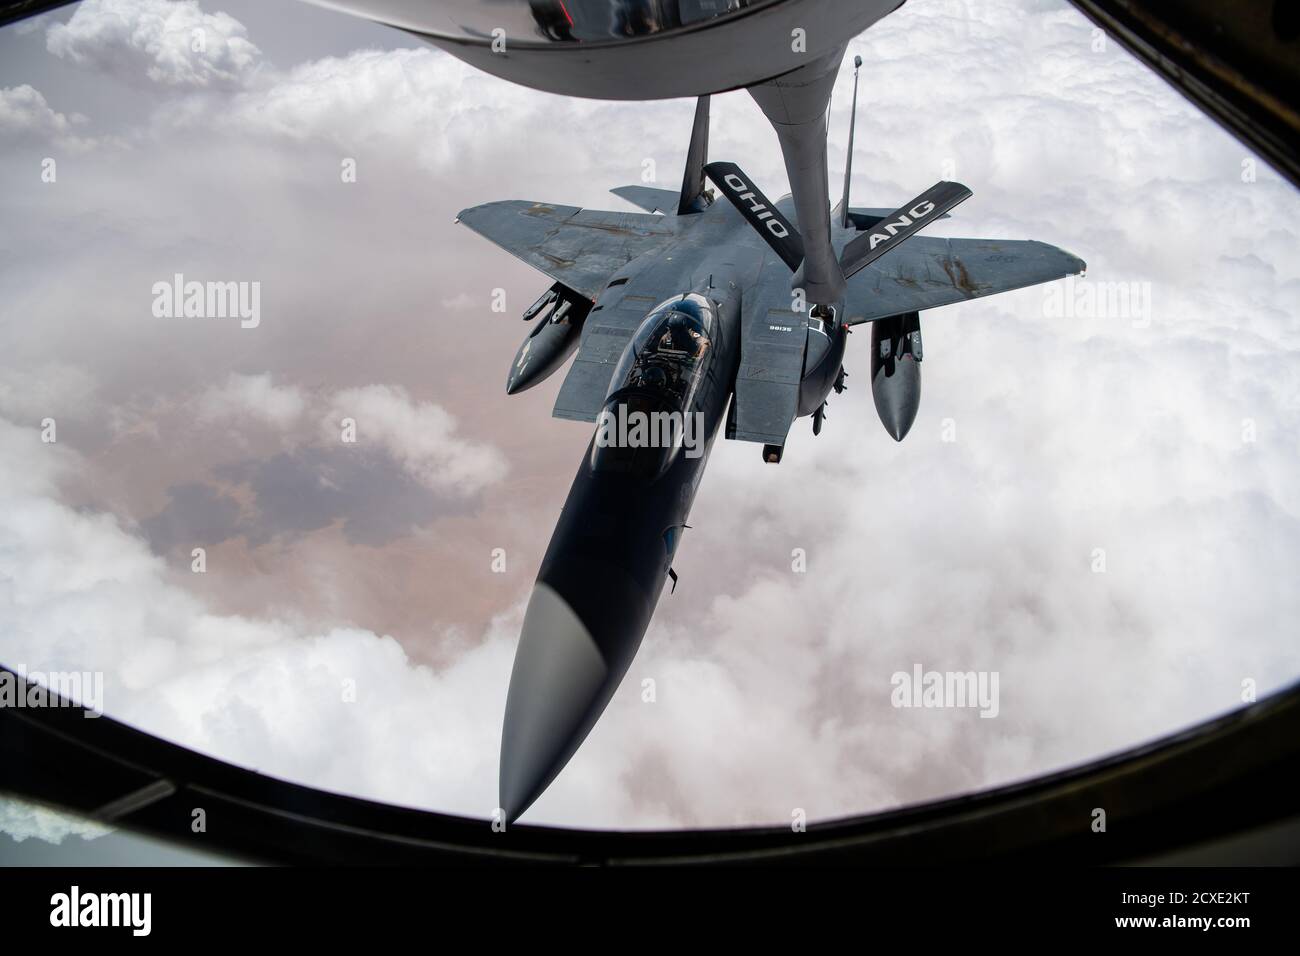 U.S. Air Force Airmen assigned to the 340th Expeditionary Air Refueling Squadron conduct aerial refueling missions aboard a U.S. Air Force KC-135 Stratotanker with a U.S. Air Force  F-15E Strike Eagle over the U.S. Central Command area of responsibility, Sept 10, 2020. The F-15E Strike Eagle is a dual-role fighter designed to perform air-to-air and air-to-ground missions, demonstrating U.S. Air Force Central Commands' posture to compete, deter, and win against state and non-state actors. (U.S. Air Force photo by Staff Sgt. Justin Parsons) Stock Photo